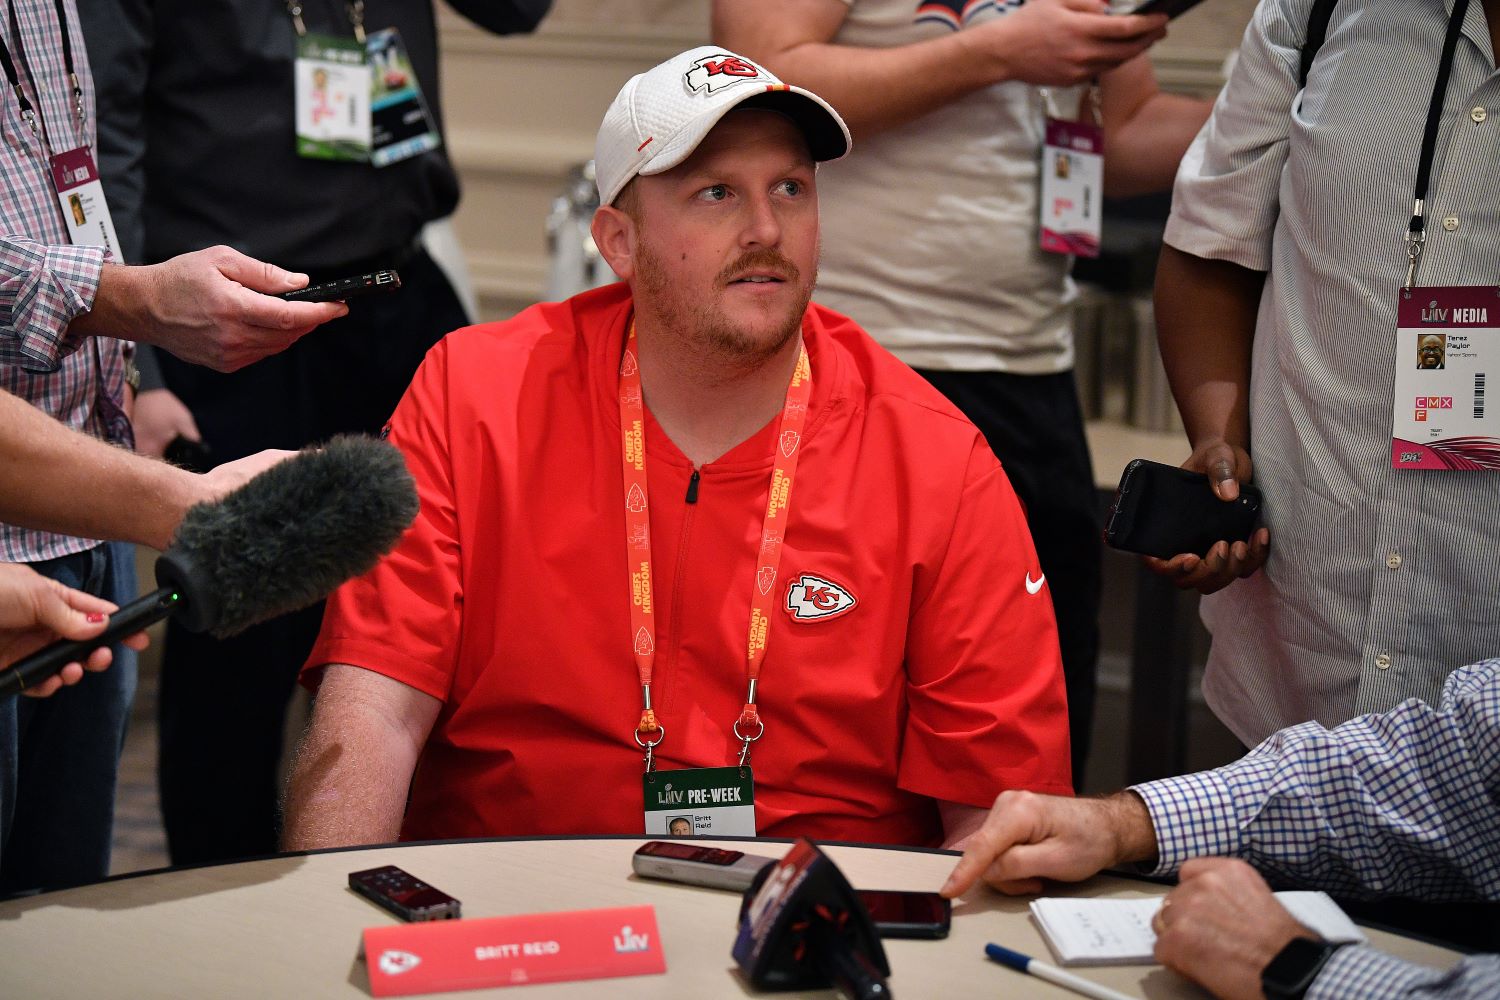 Andy Reid's son, Britt Reid, will not coach for the Chiefs in Super Bowl 55 after a car crash left one child with life-threatening injuries.